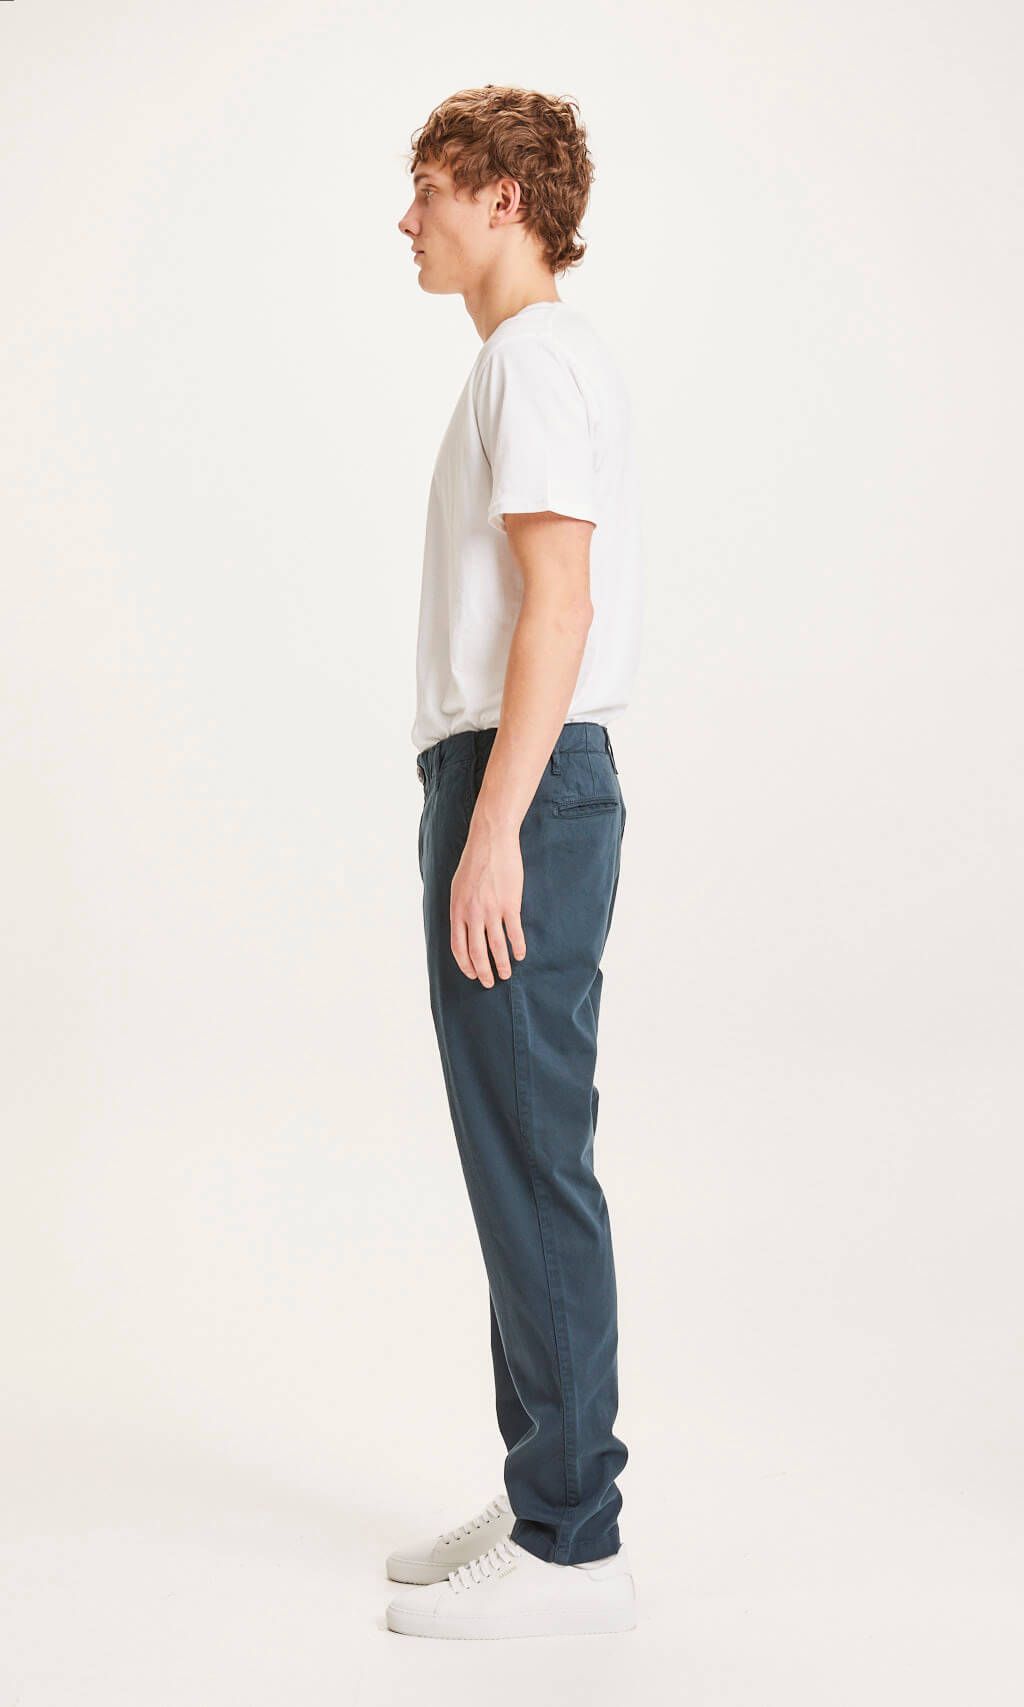 Chuck Regular Stretched Chino Pant Total Eclipse 33/32